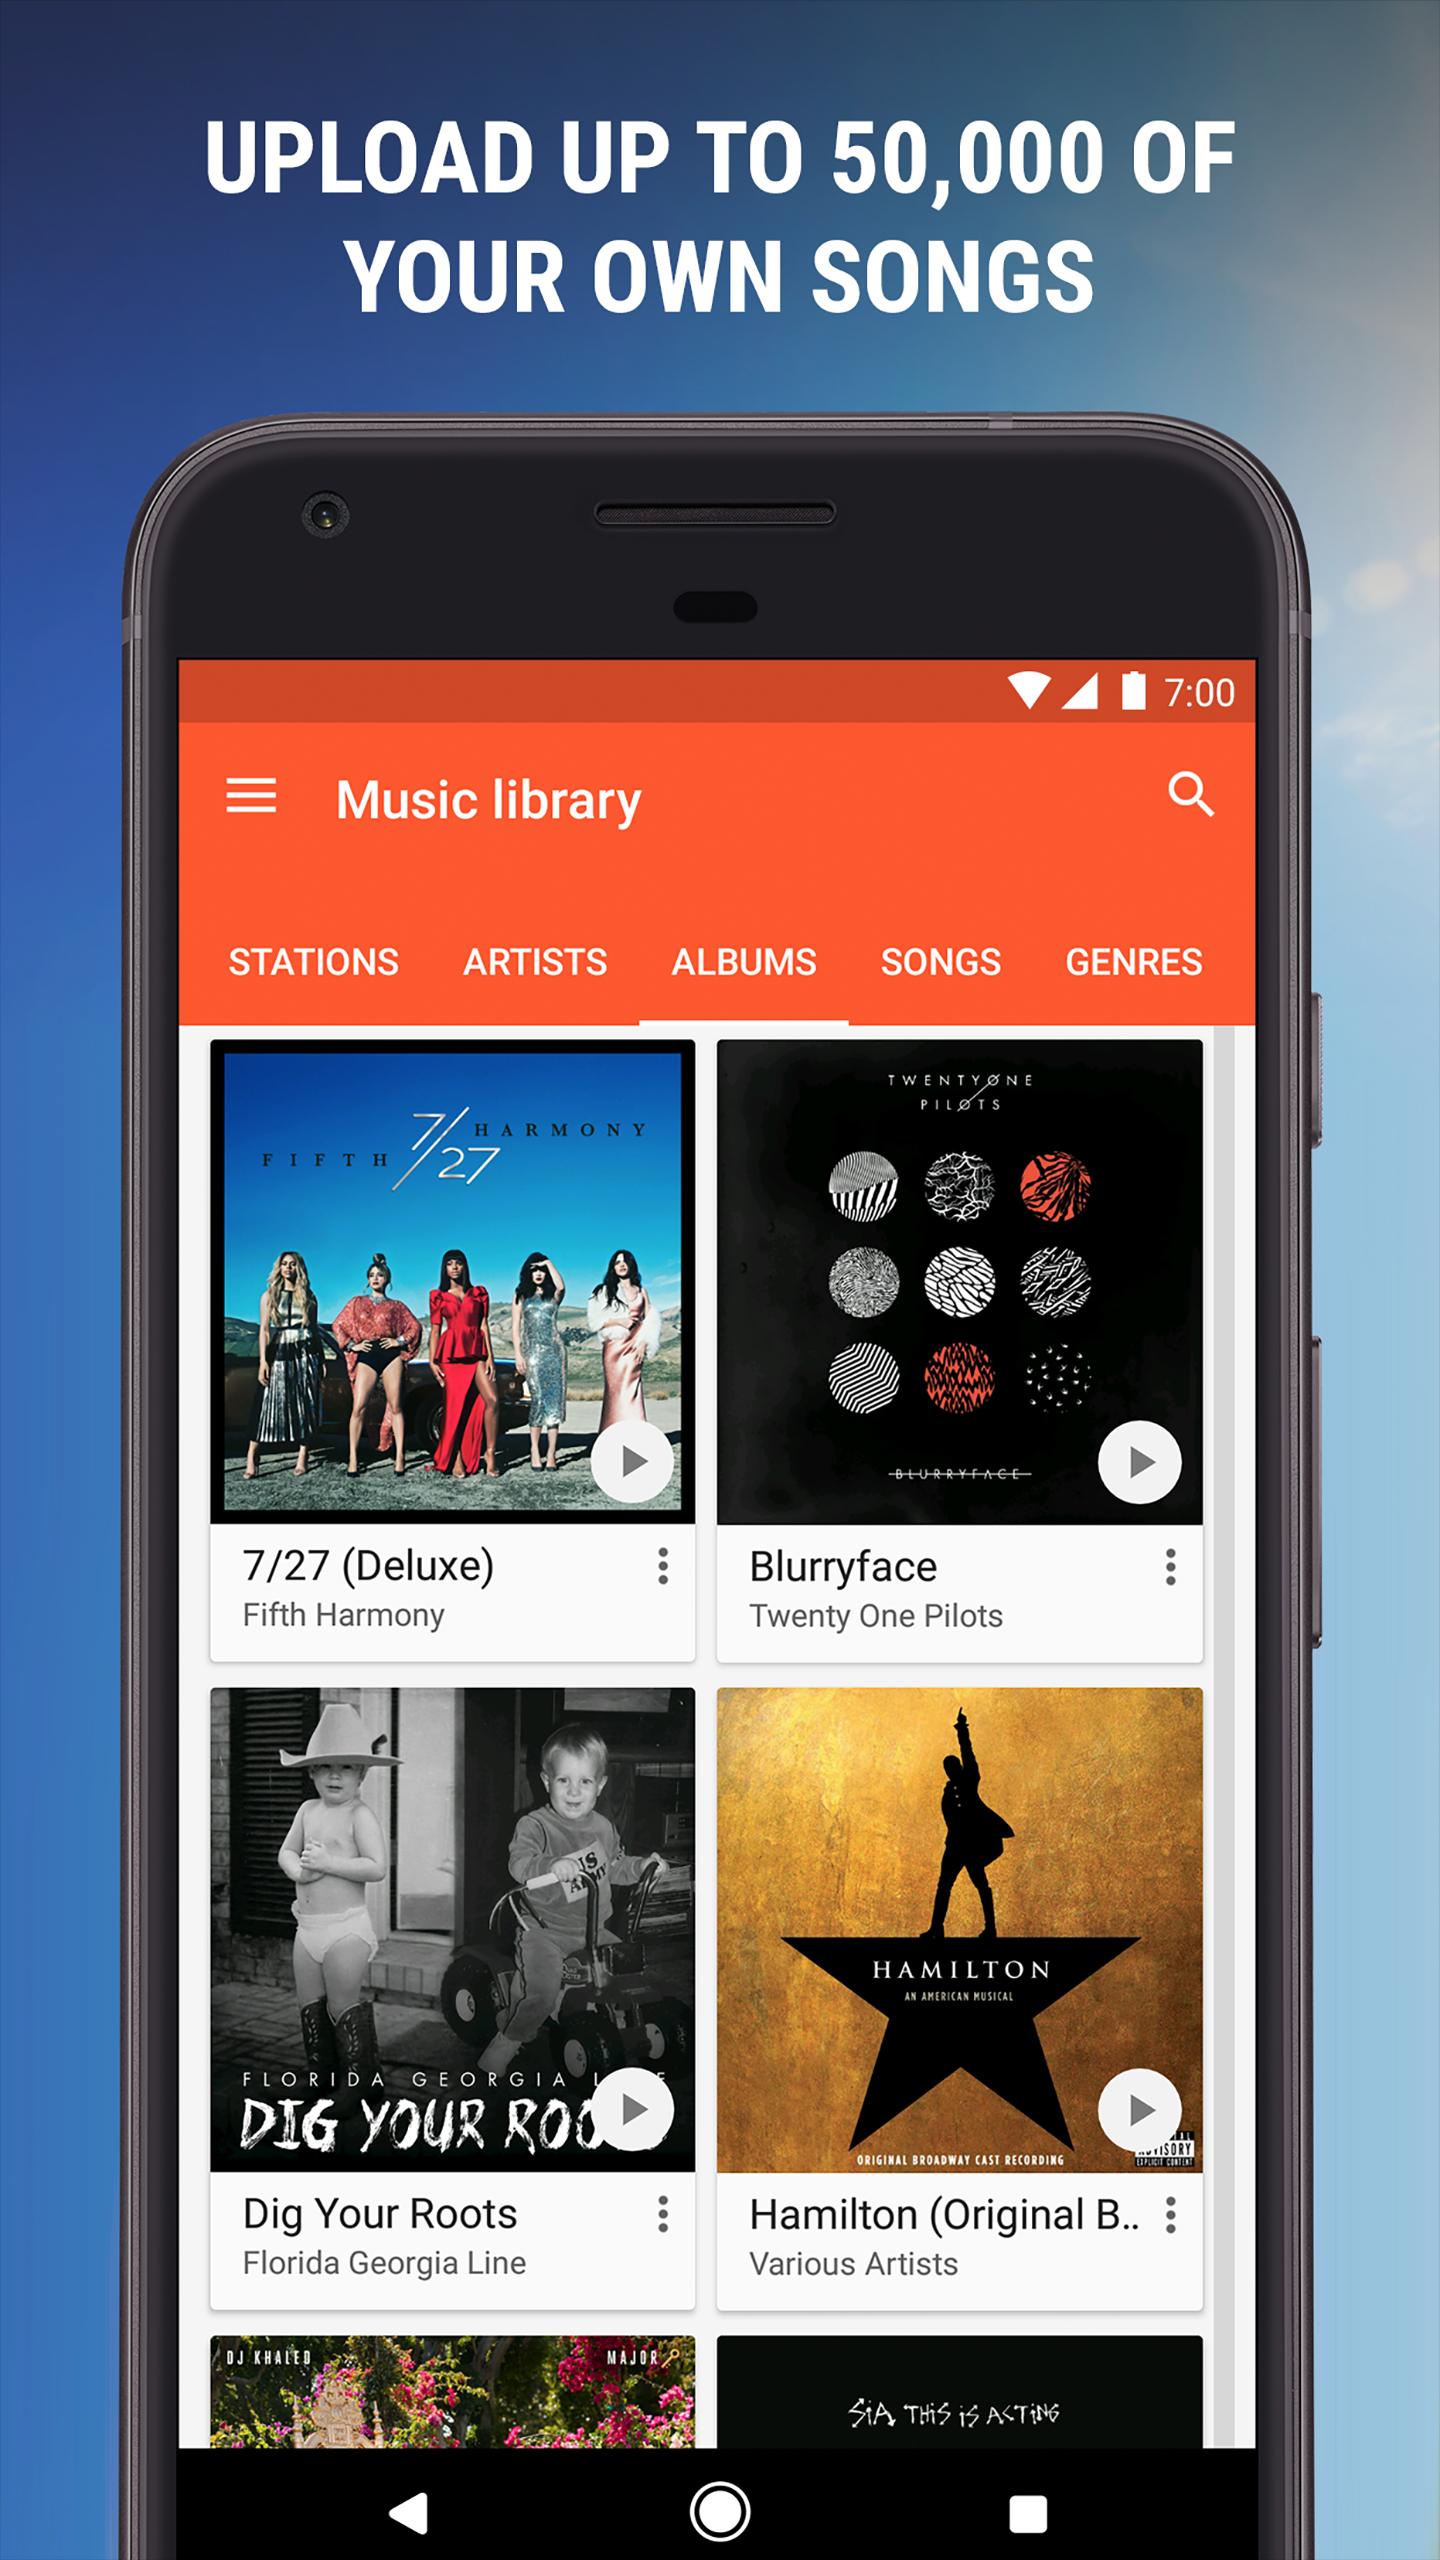 Google Play Music For Android Apk Download